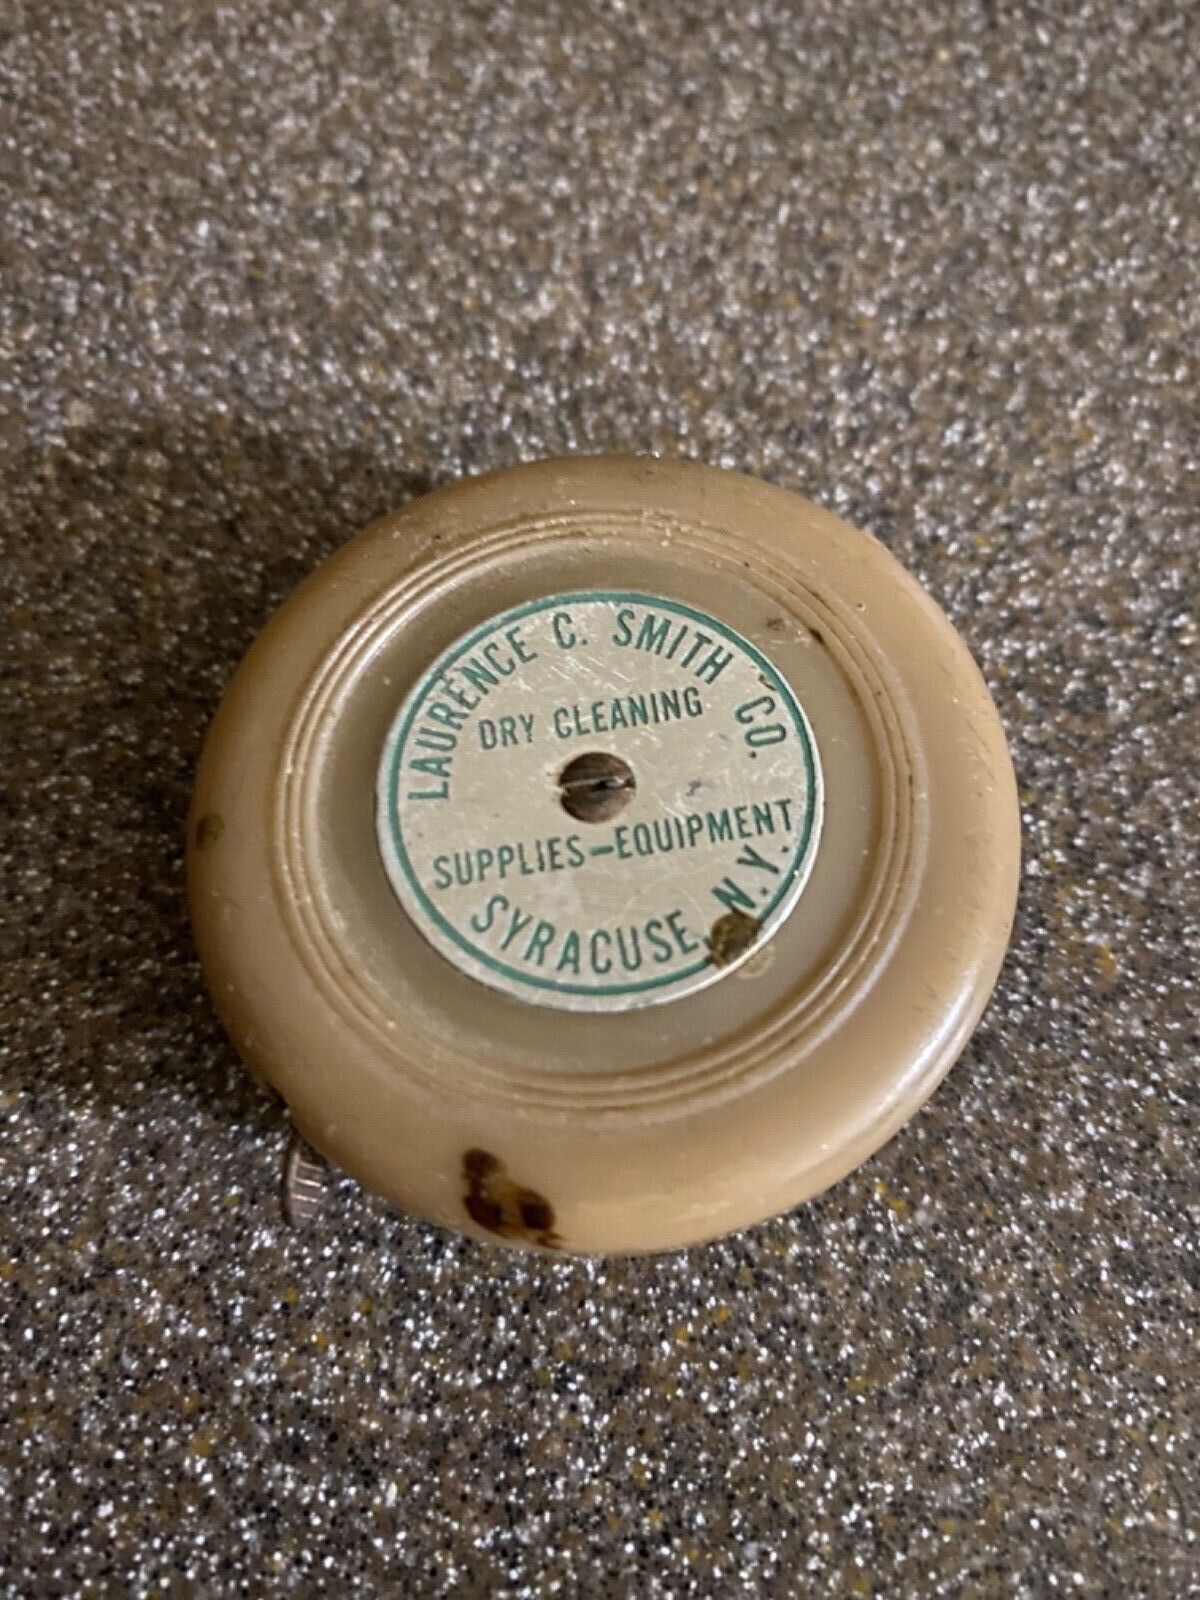  VINTAGE LAURENCE C SMITH 6\' TAPE MEASURE SYRACUSE NY DRY CLEANING SUPPLIES 